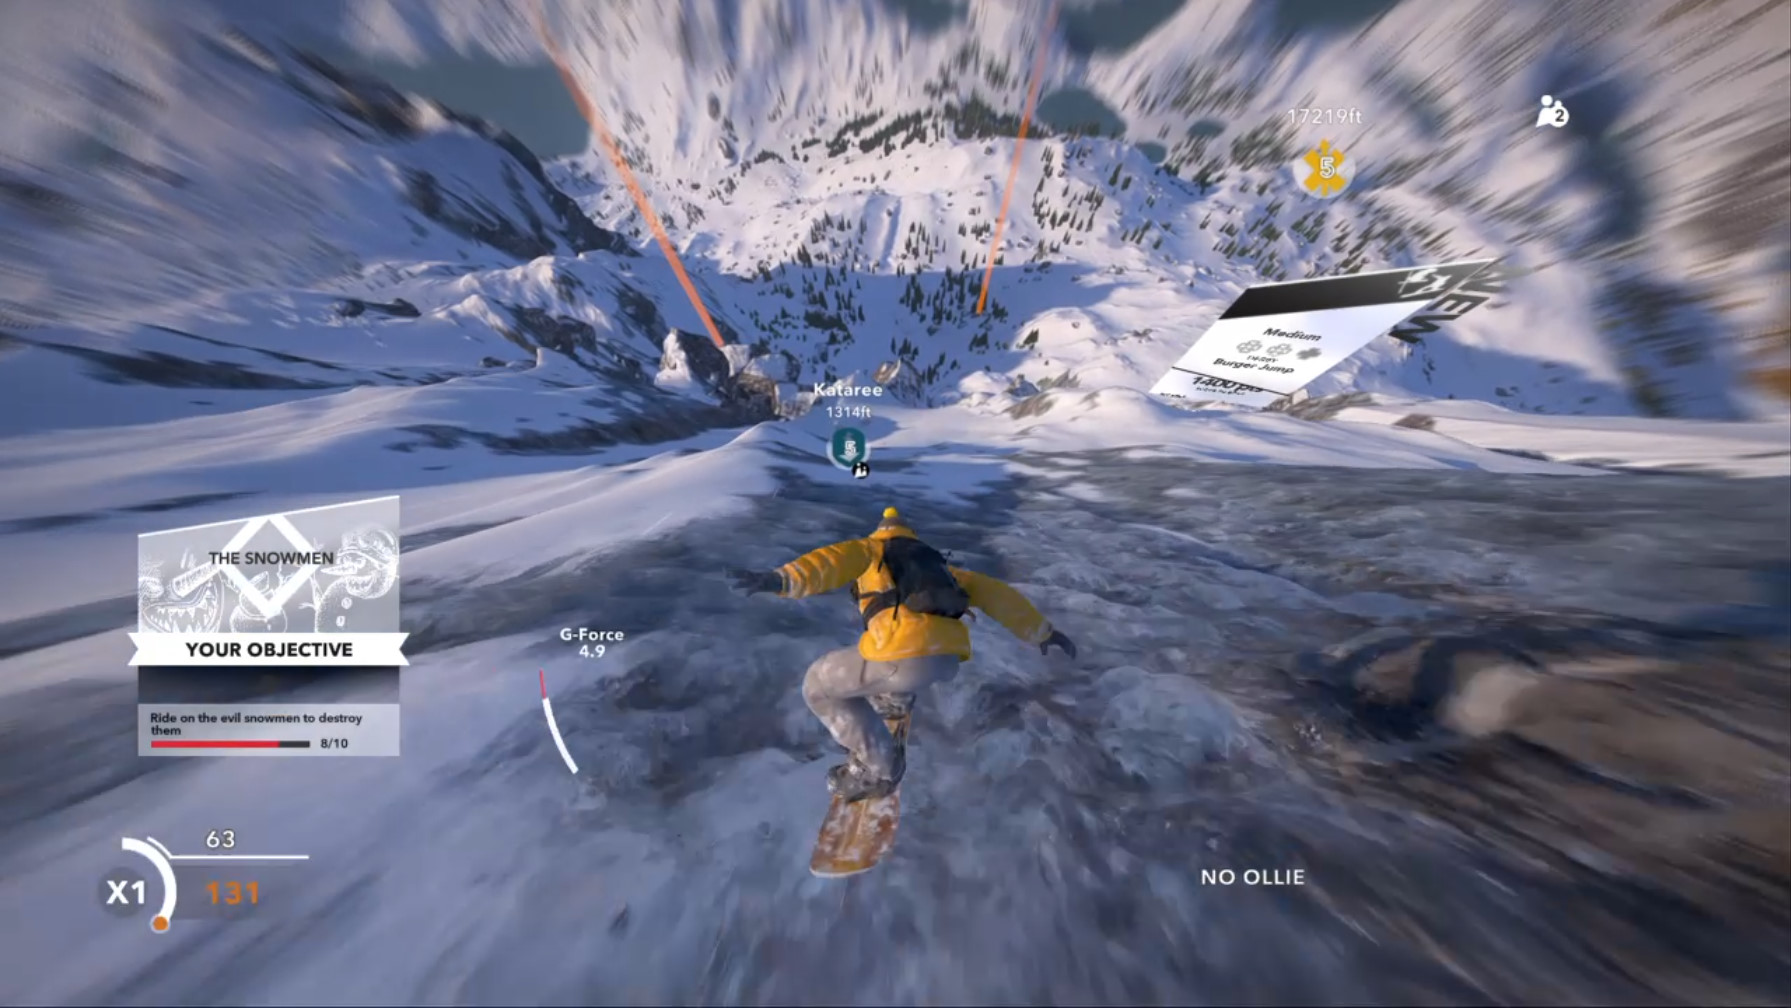 Top Tips for Those Just Getting Started with Steep – GameSpew